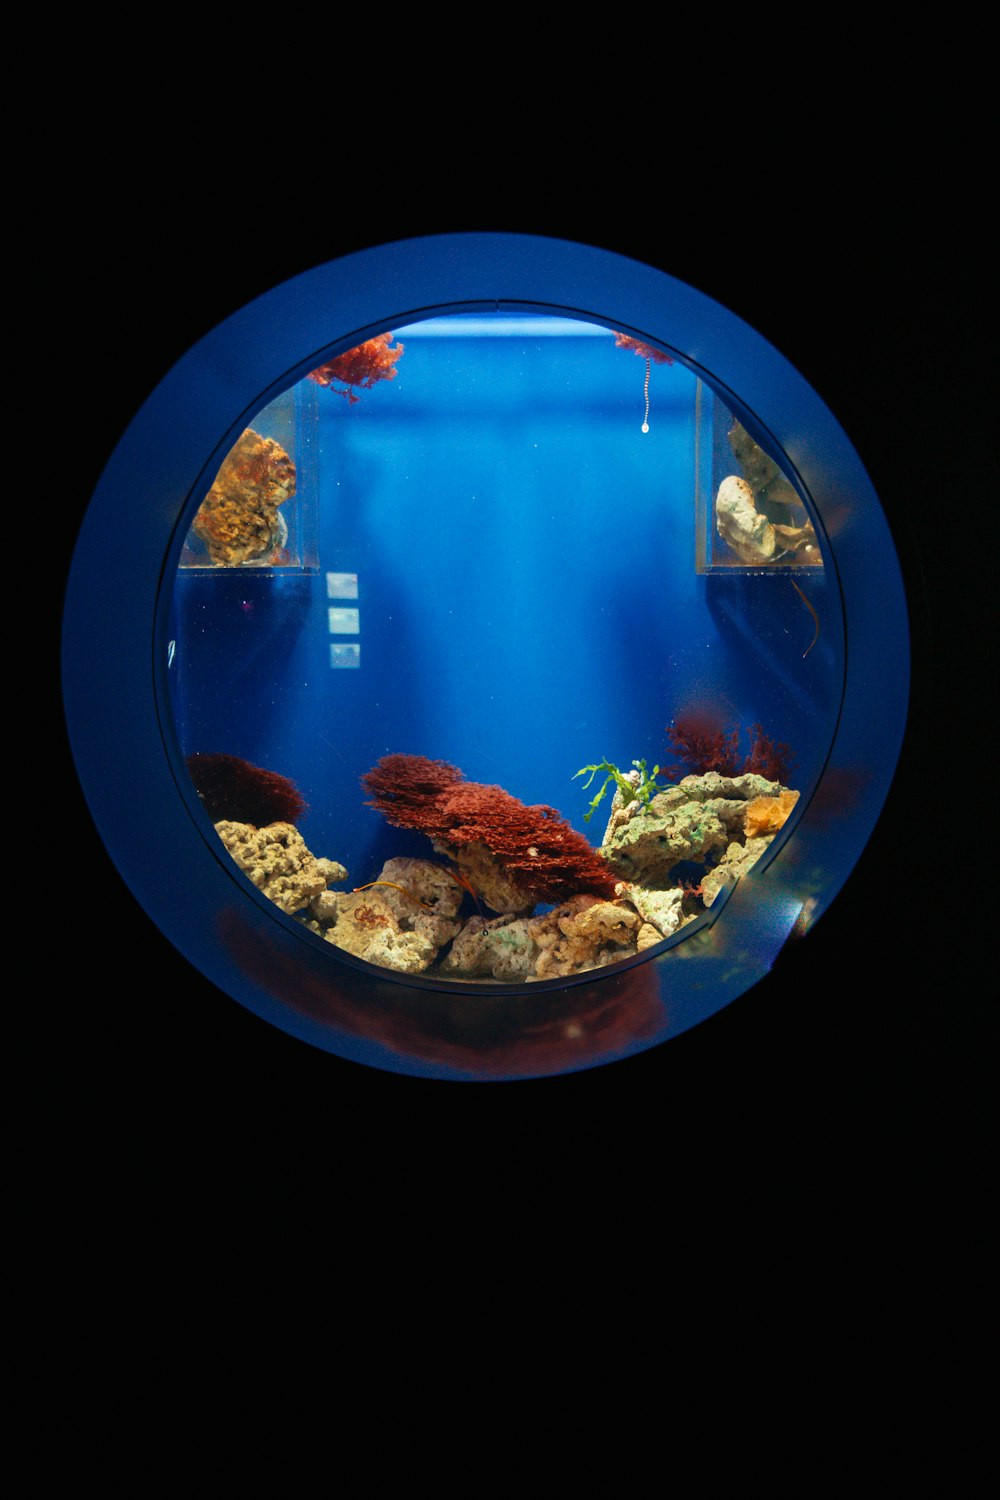 a fish in a blue bowl in a dark room